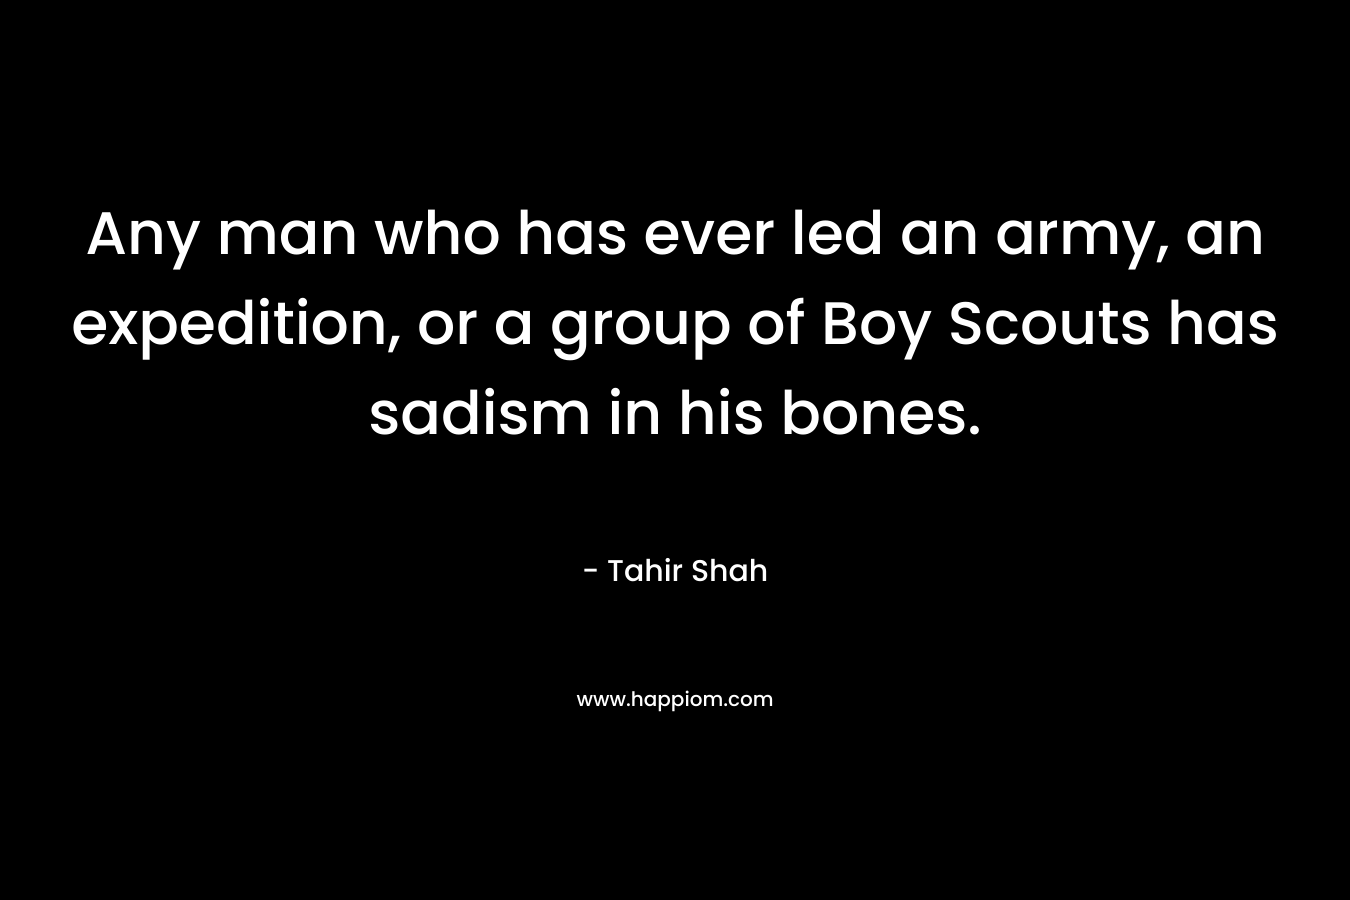 Any man who has ever led an army, an expedition, or a group of Boy Scouts has sadism in his bones.